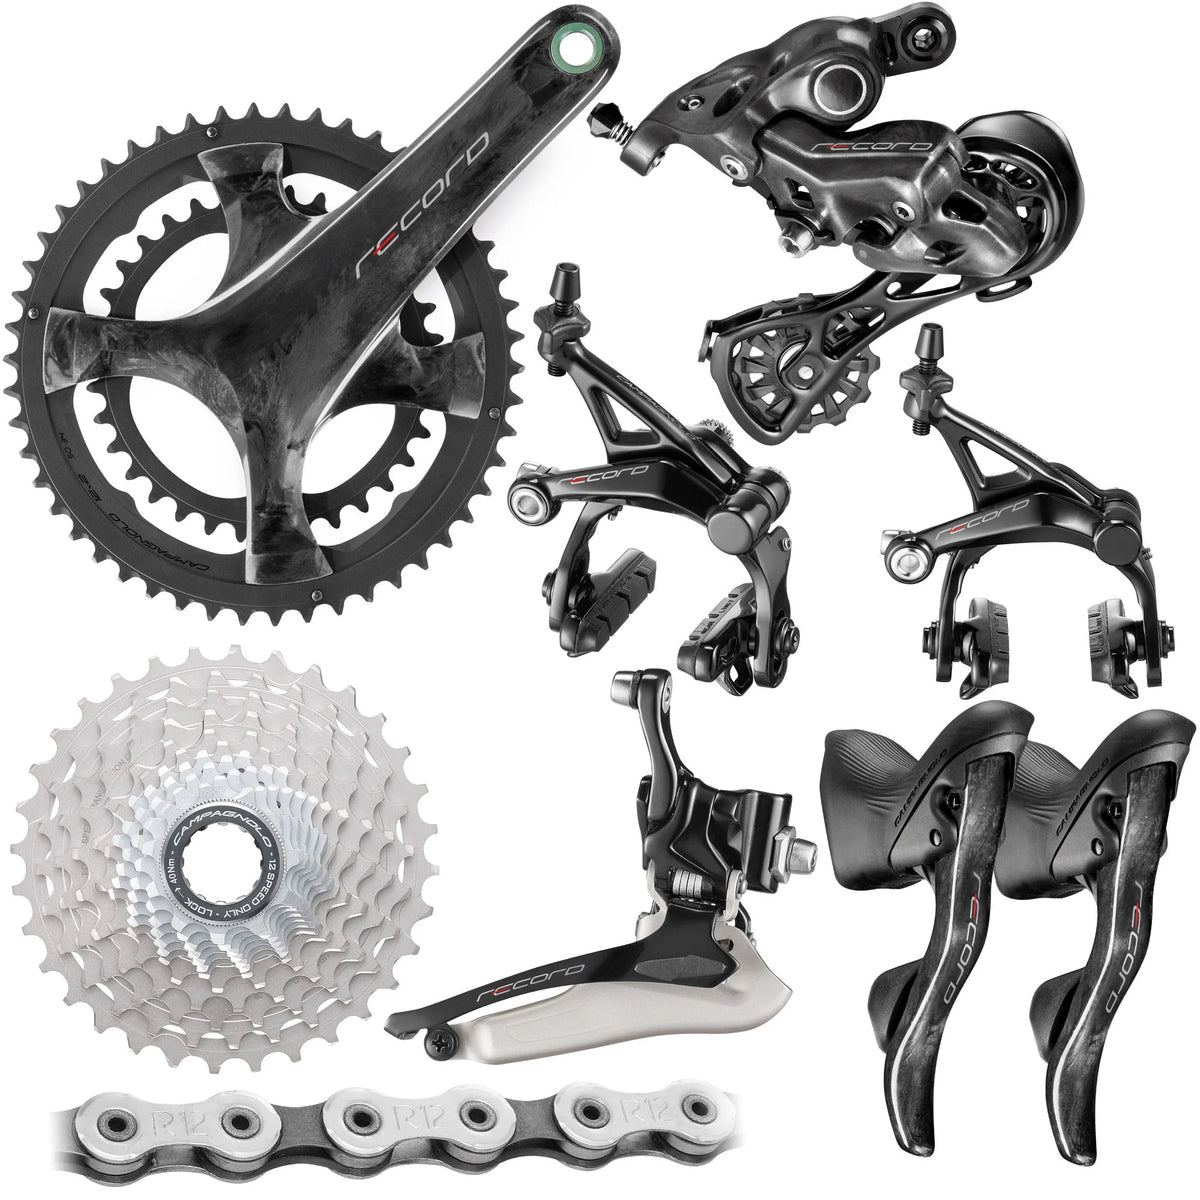 Campagnolo Record 12 Groupset